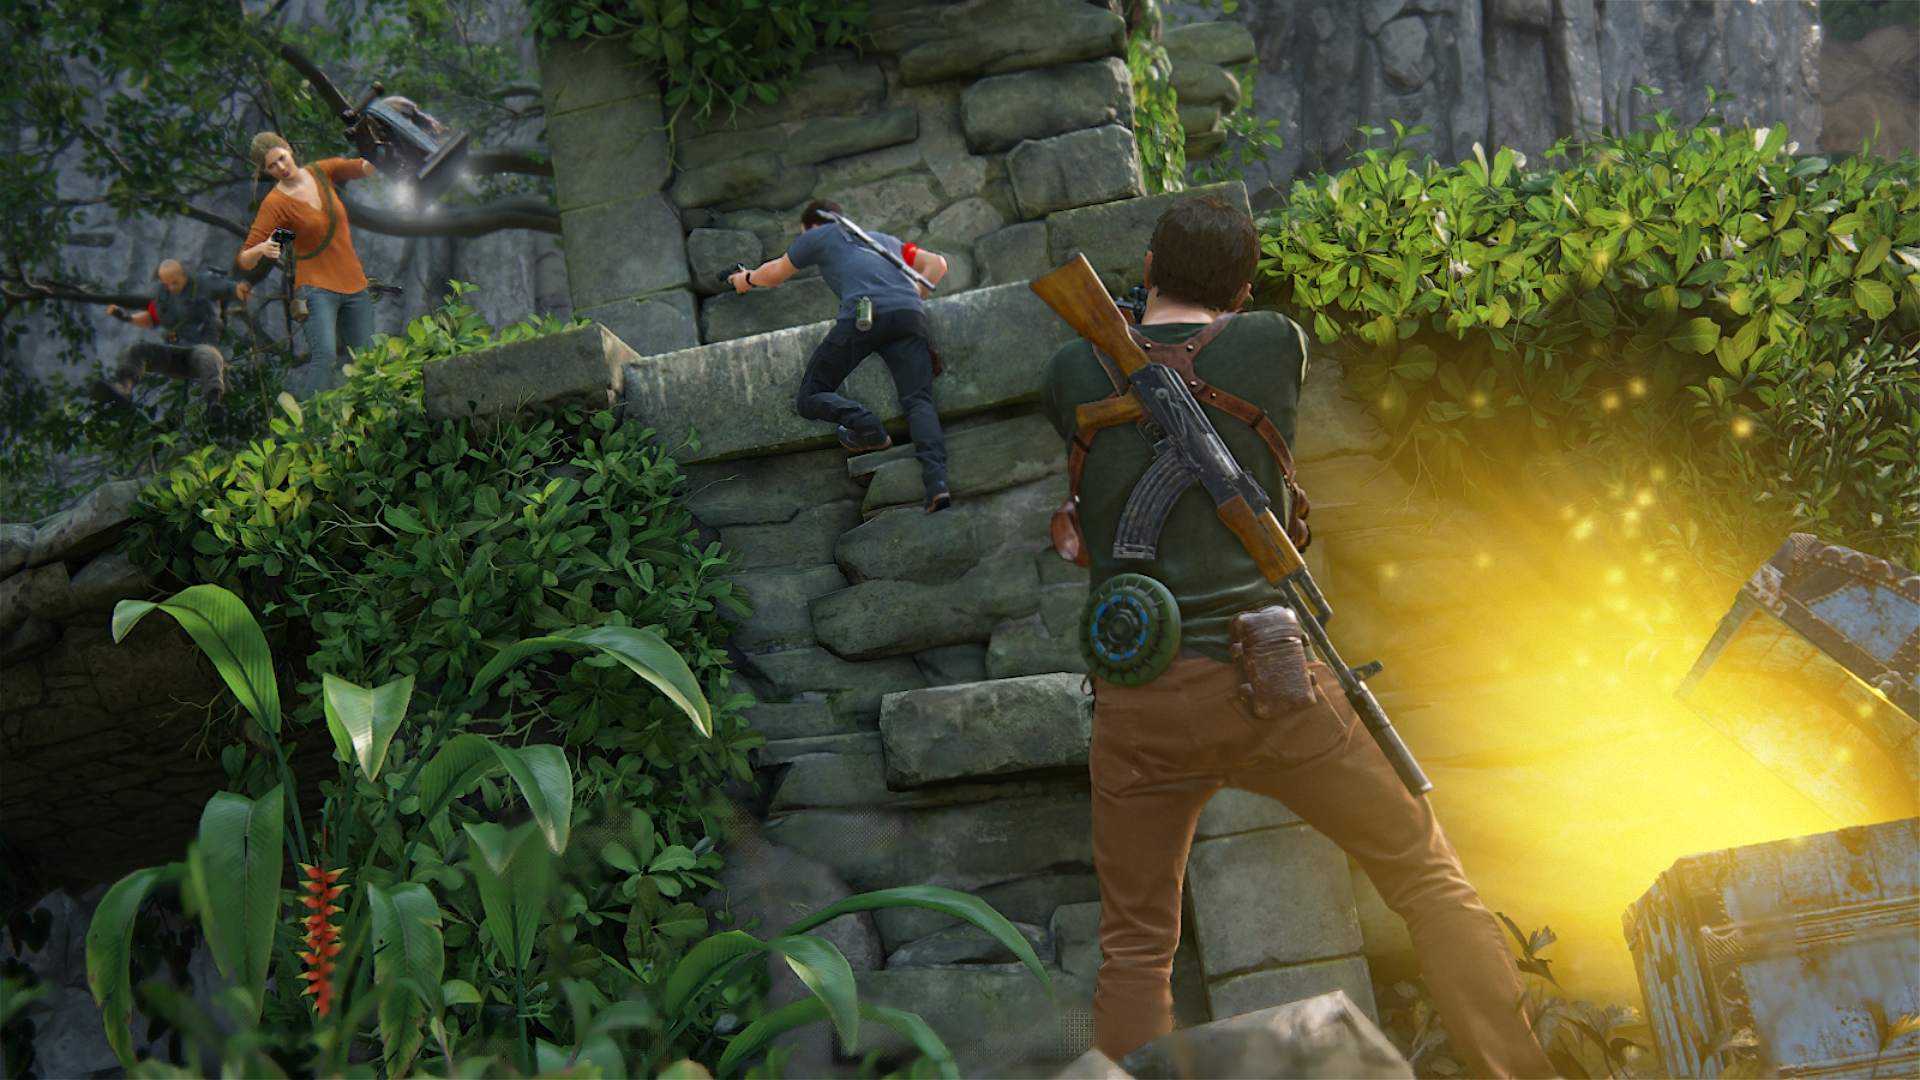 Naughty Dog reveals that Plunder Mode will return in Uncharted 4